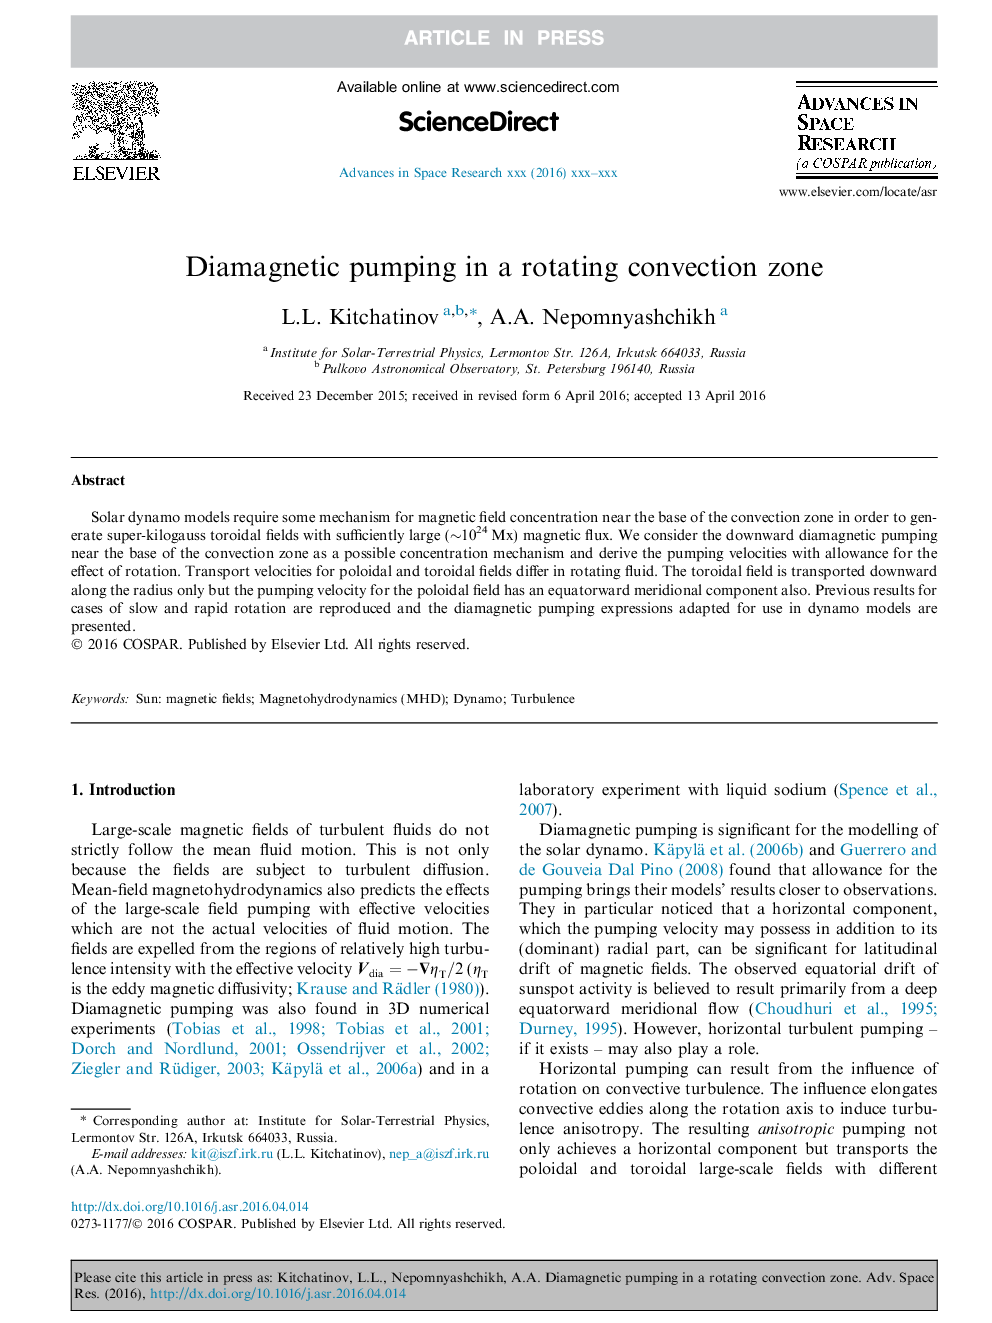 Diamagnetic pumping in a rotating convection zone